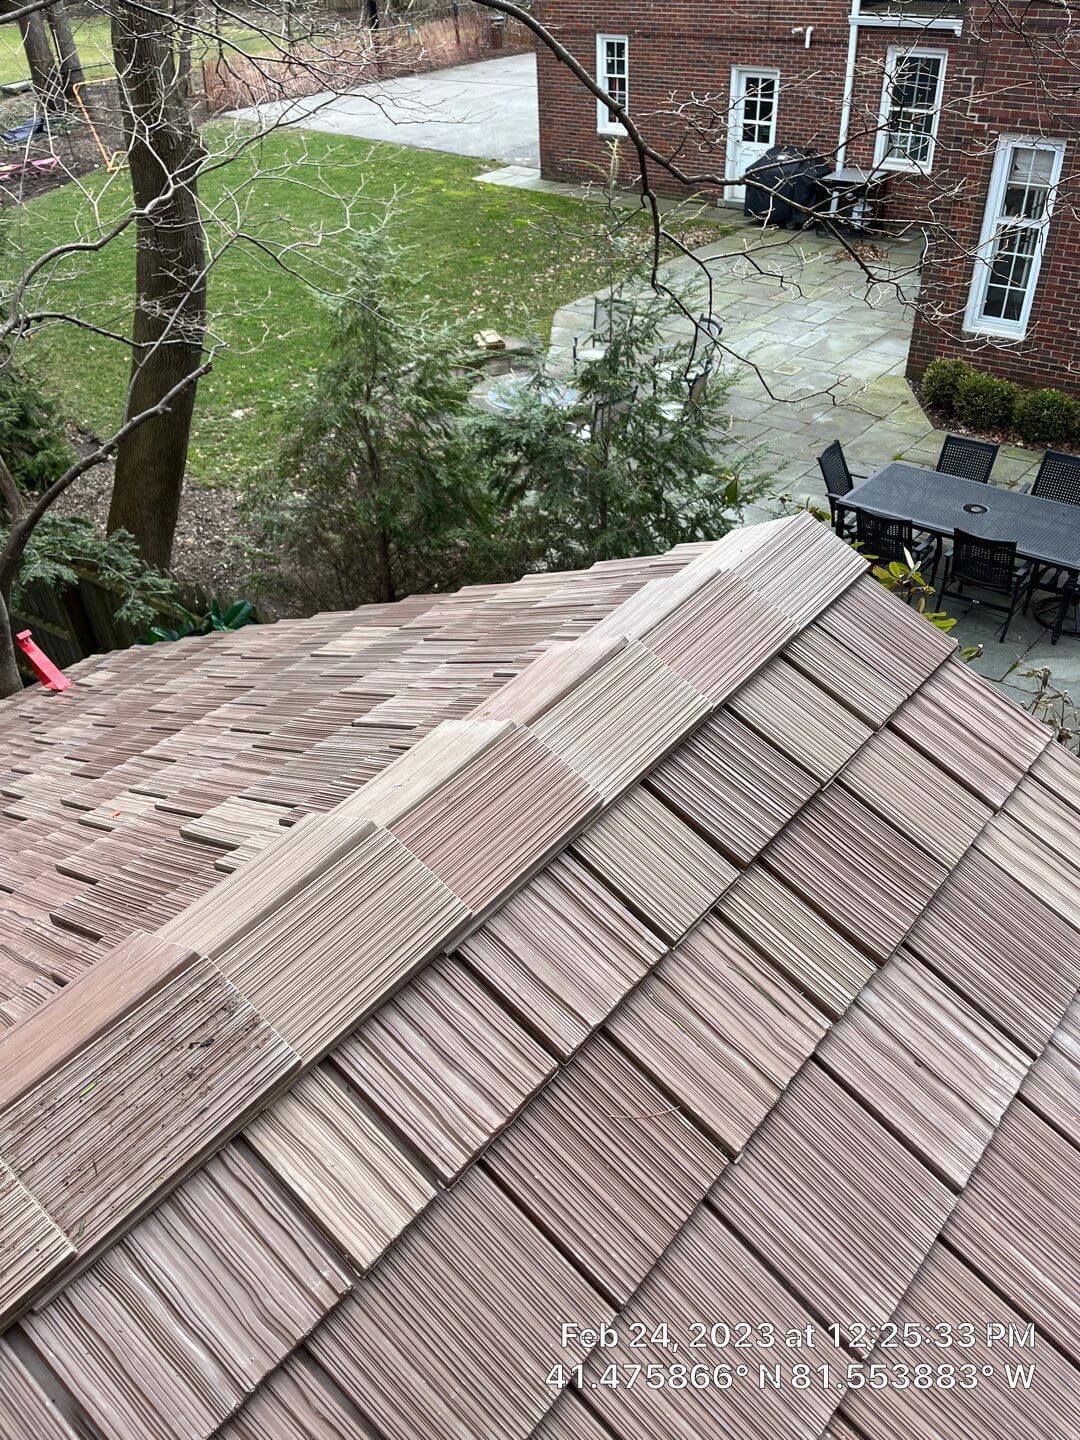 Specialty Roof - Shaker Hts, OH